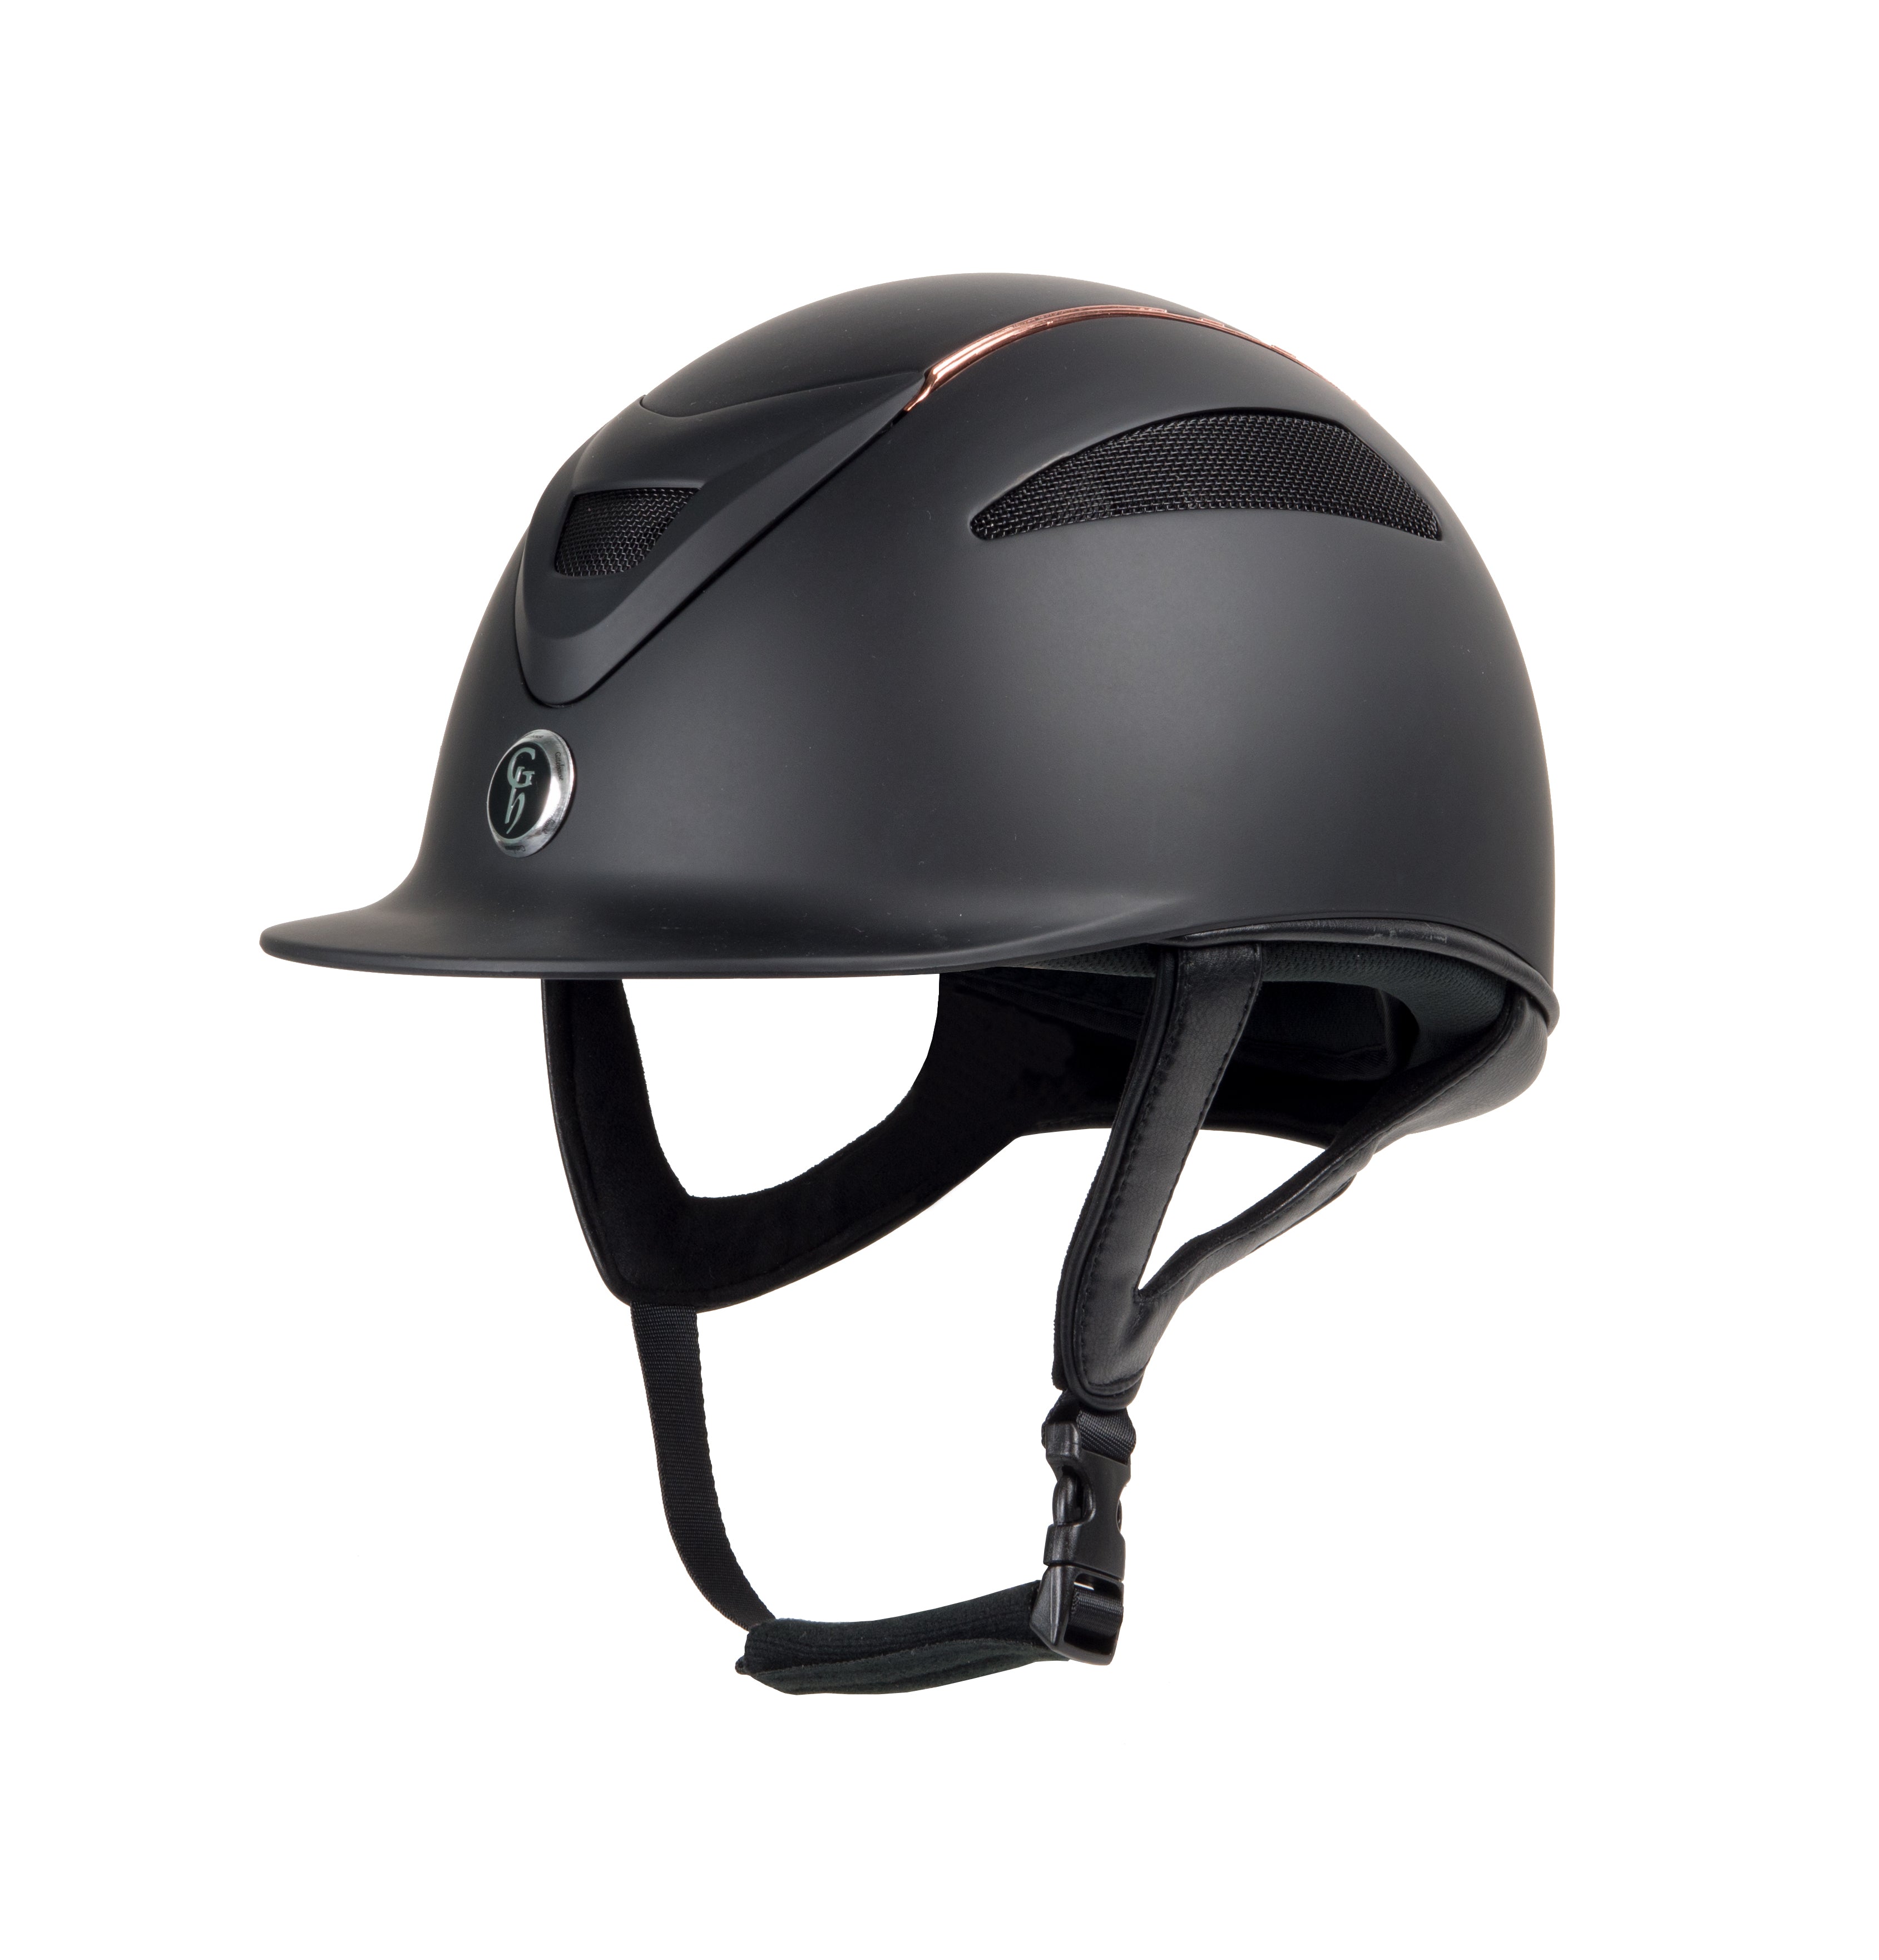 GH Conquest MKII - Riding Hat - Black/Rose Gold Limited Edition